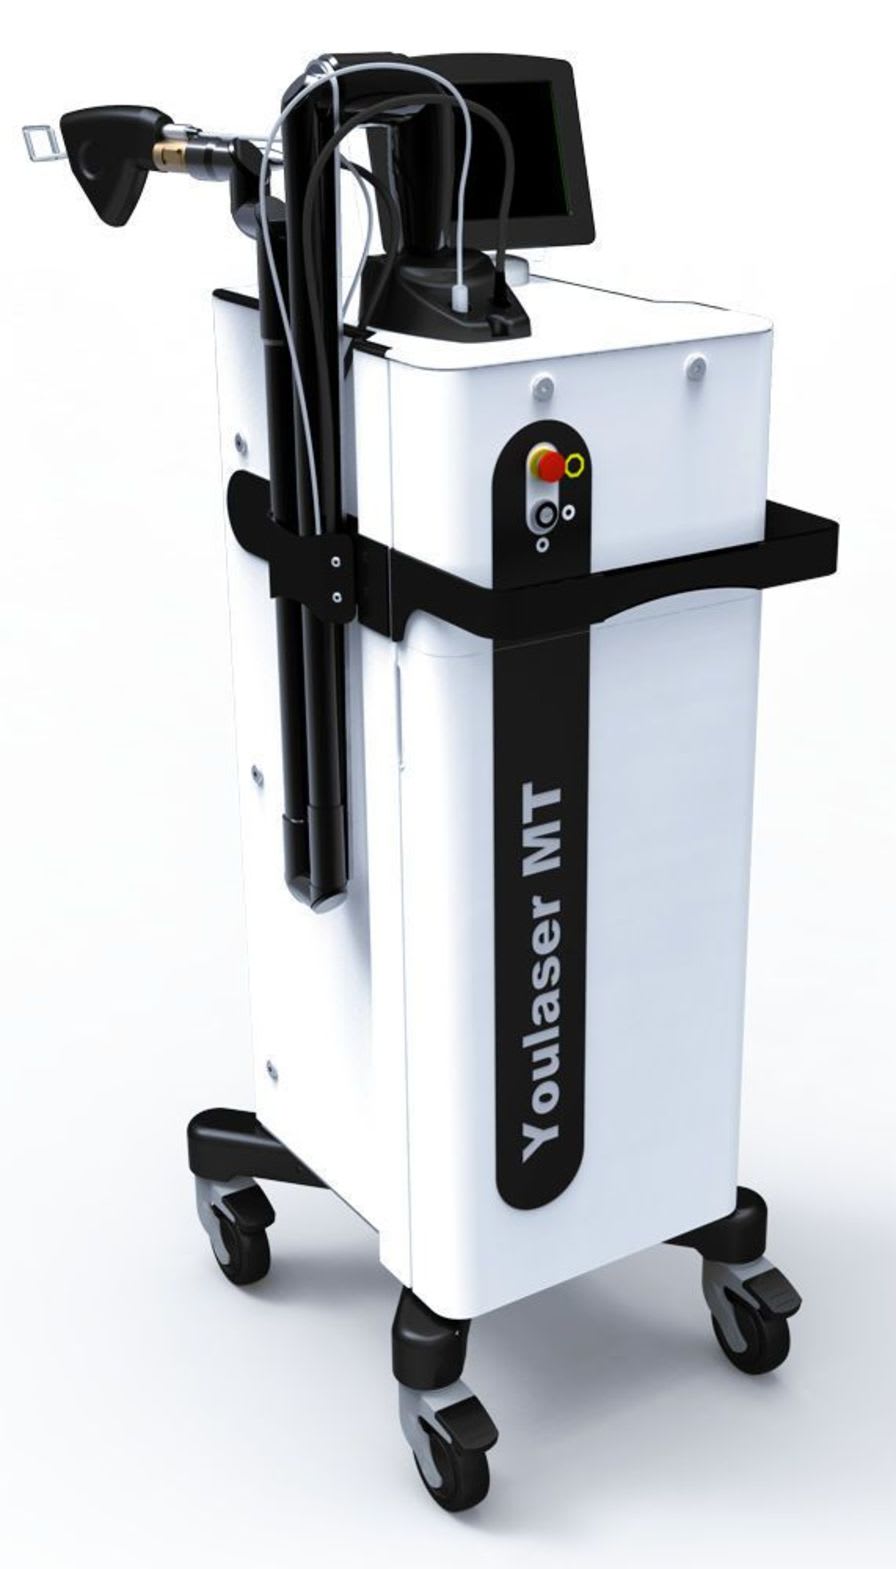 Dermatological laser / CO2 / diode / on trolley YOULASER MT 10600 nm / 1540 nm Quanta System S.p.A.